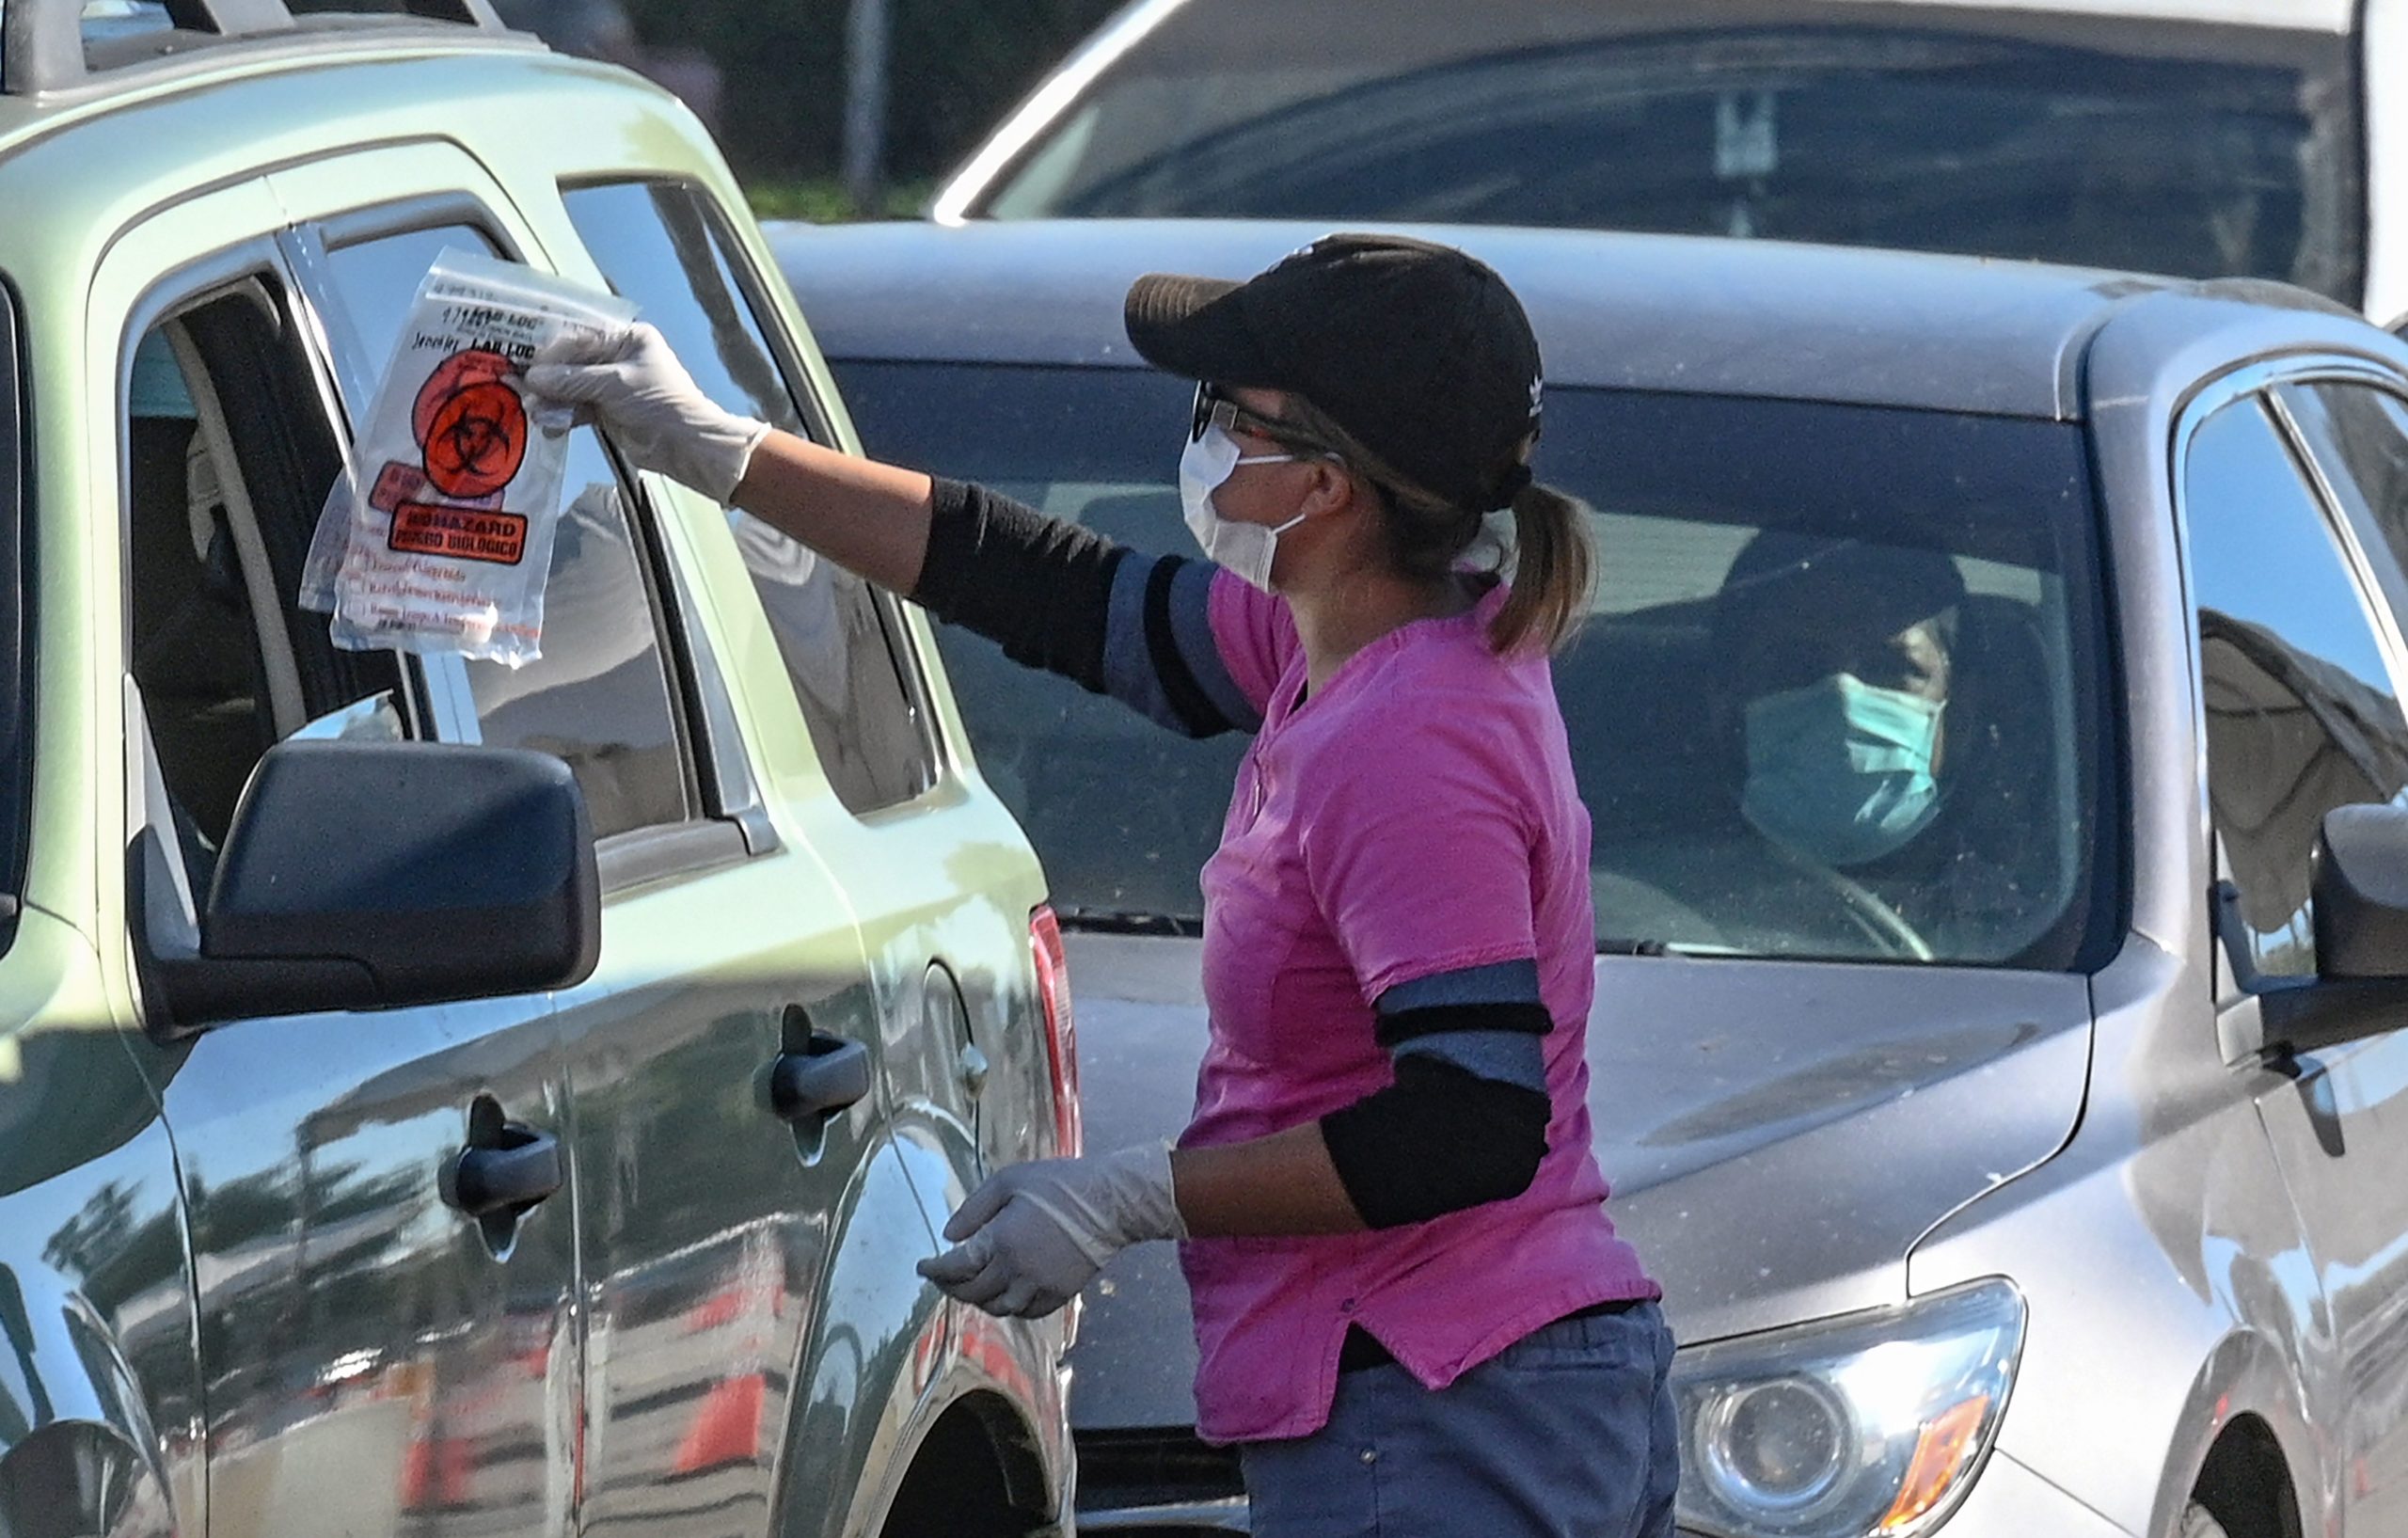 A coronavirus testing site staff member gives a self-administered test kit to a person in their car at a drive-up testing site in Los Angeles, California on Tuesday. (Robyn Beck/AFP via Getty Images)